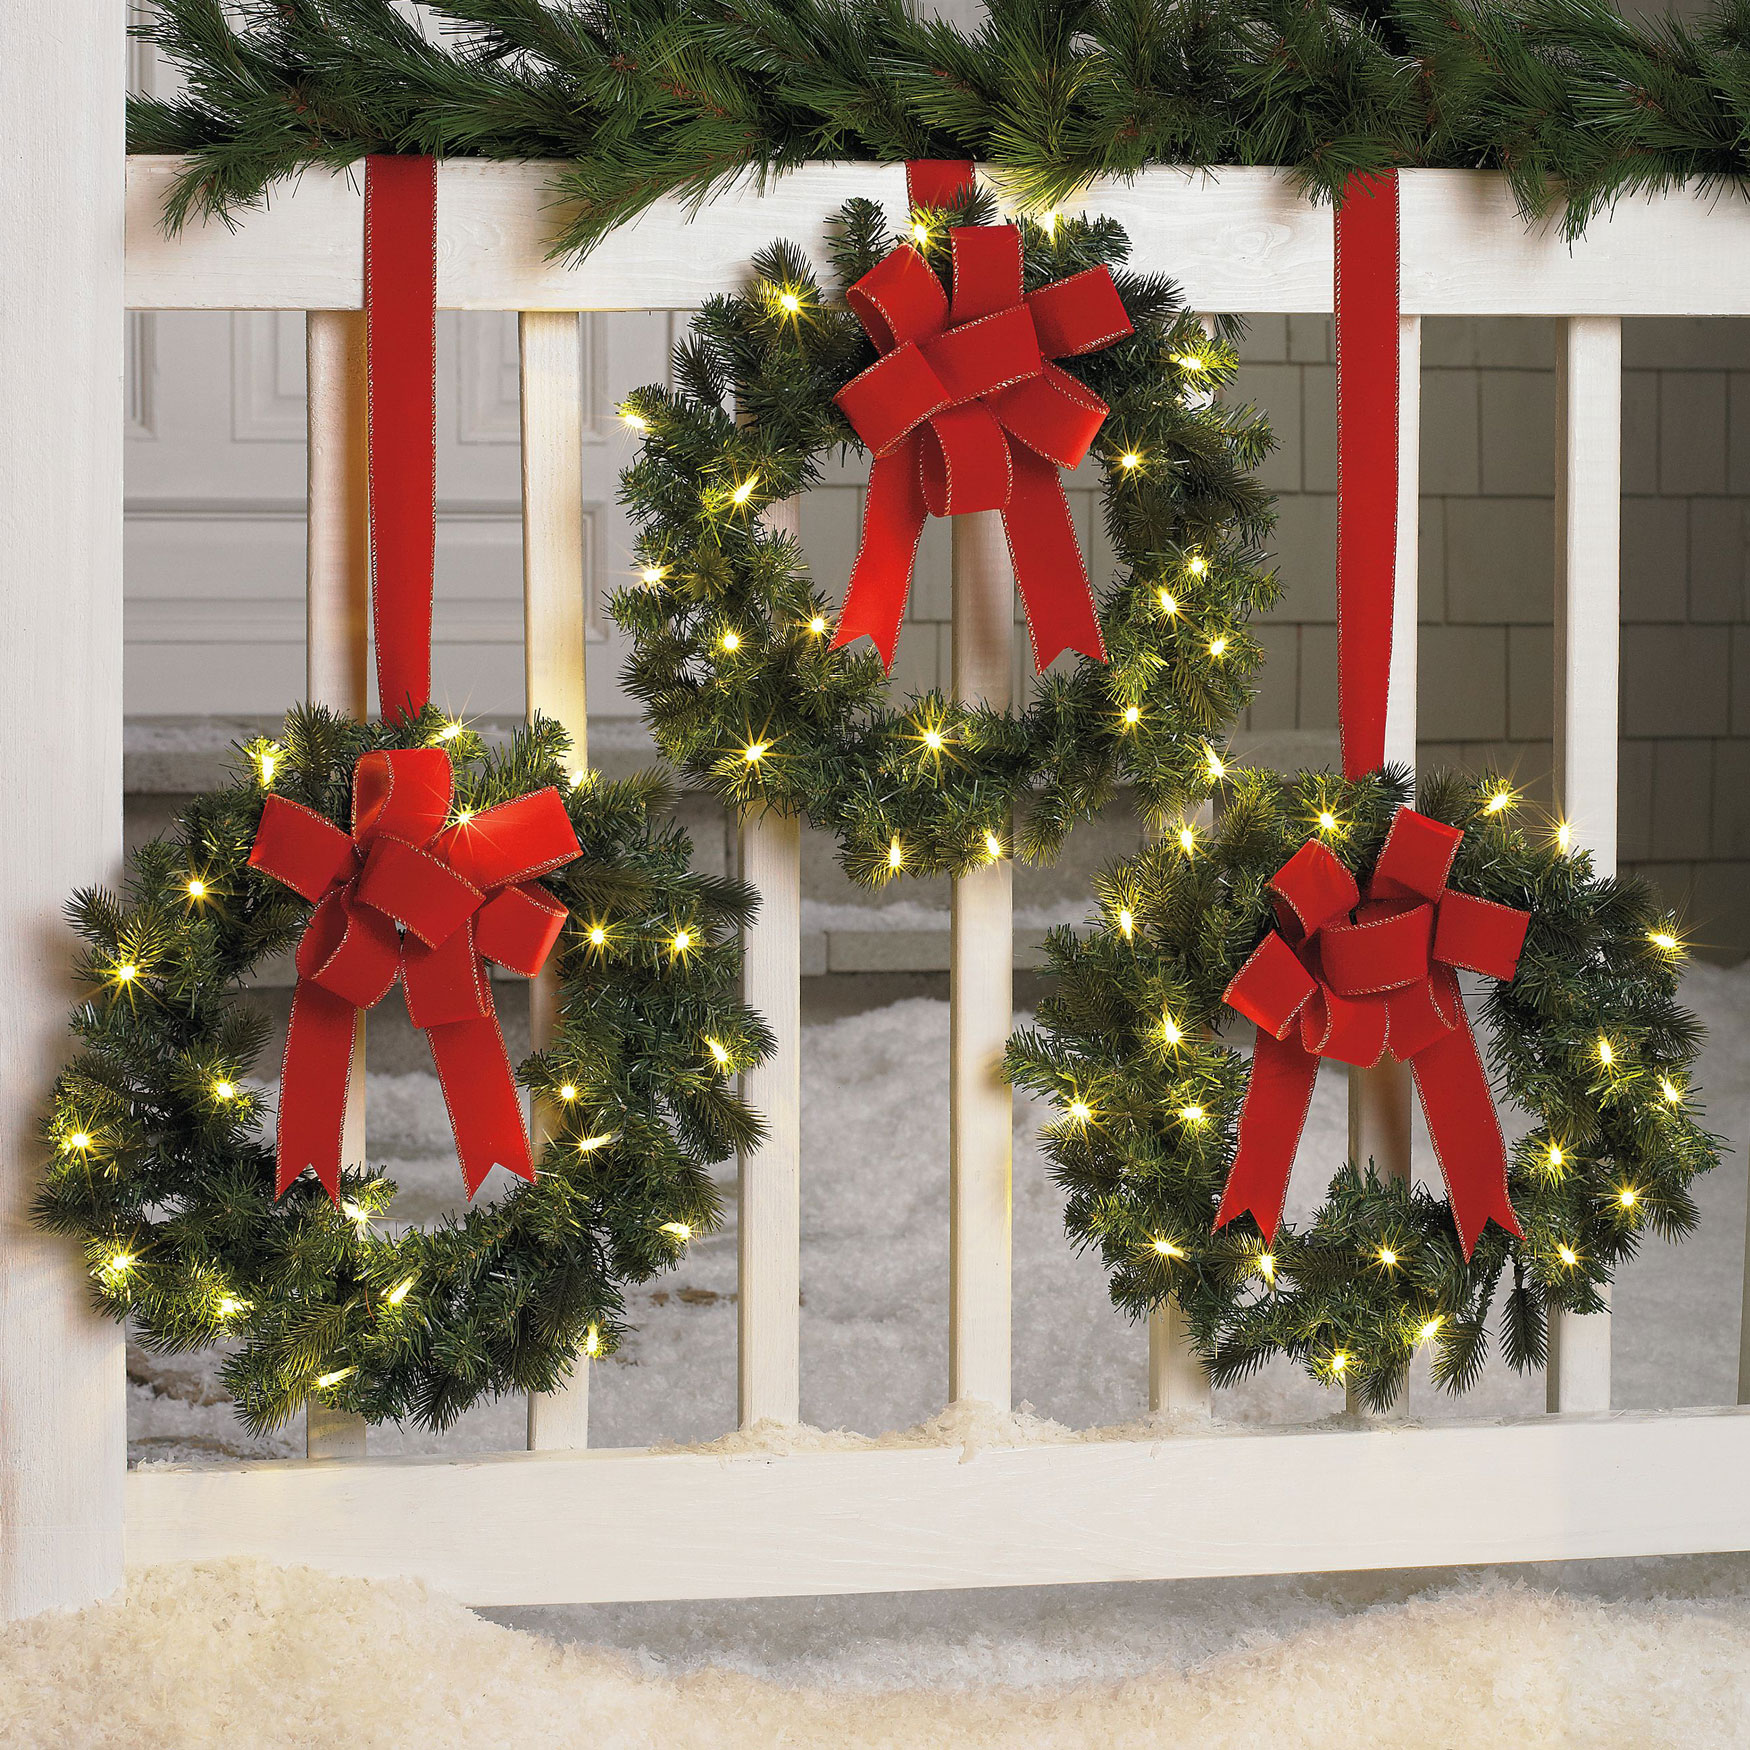 50 Best Outdoor Christmas Decorations for 2016